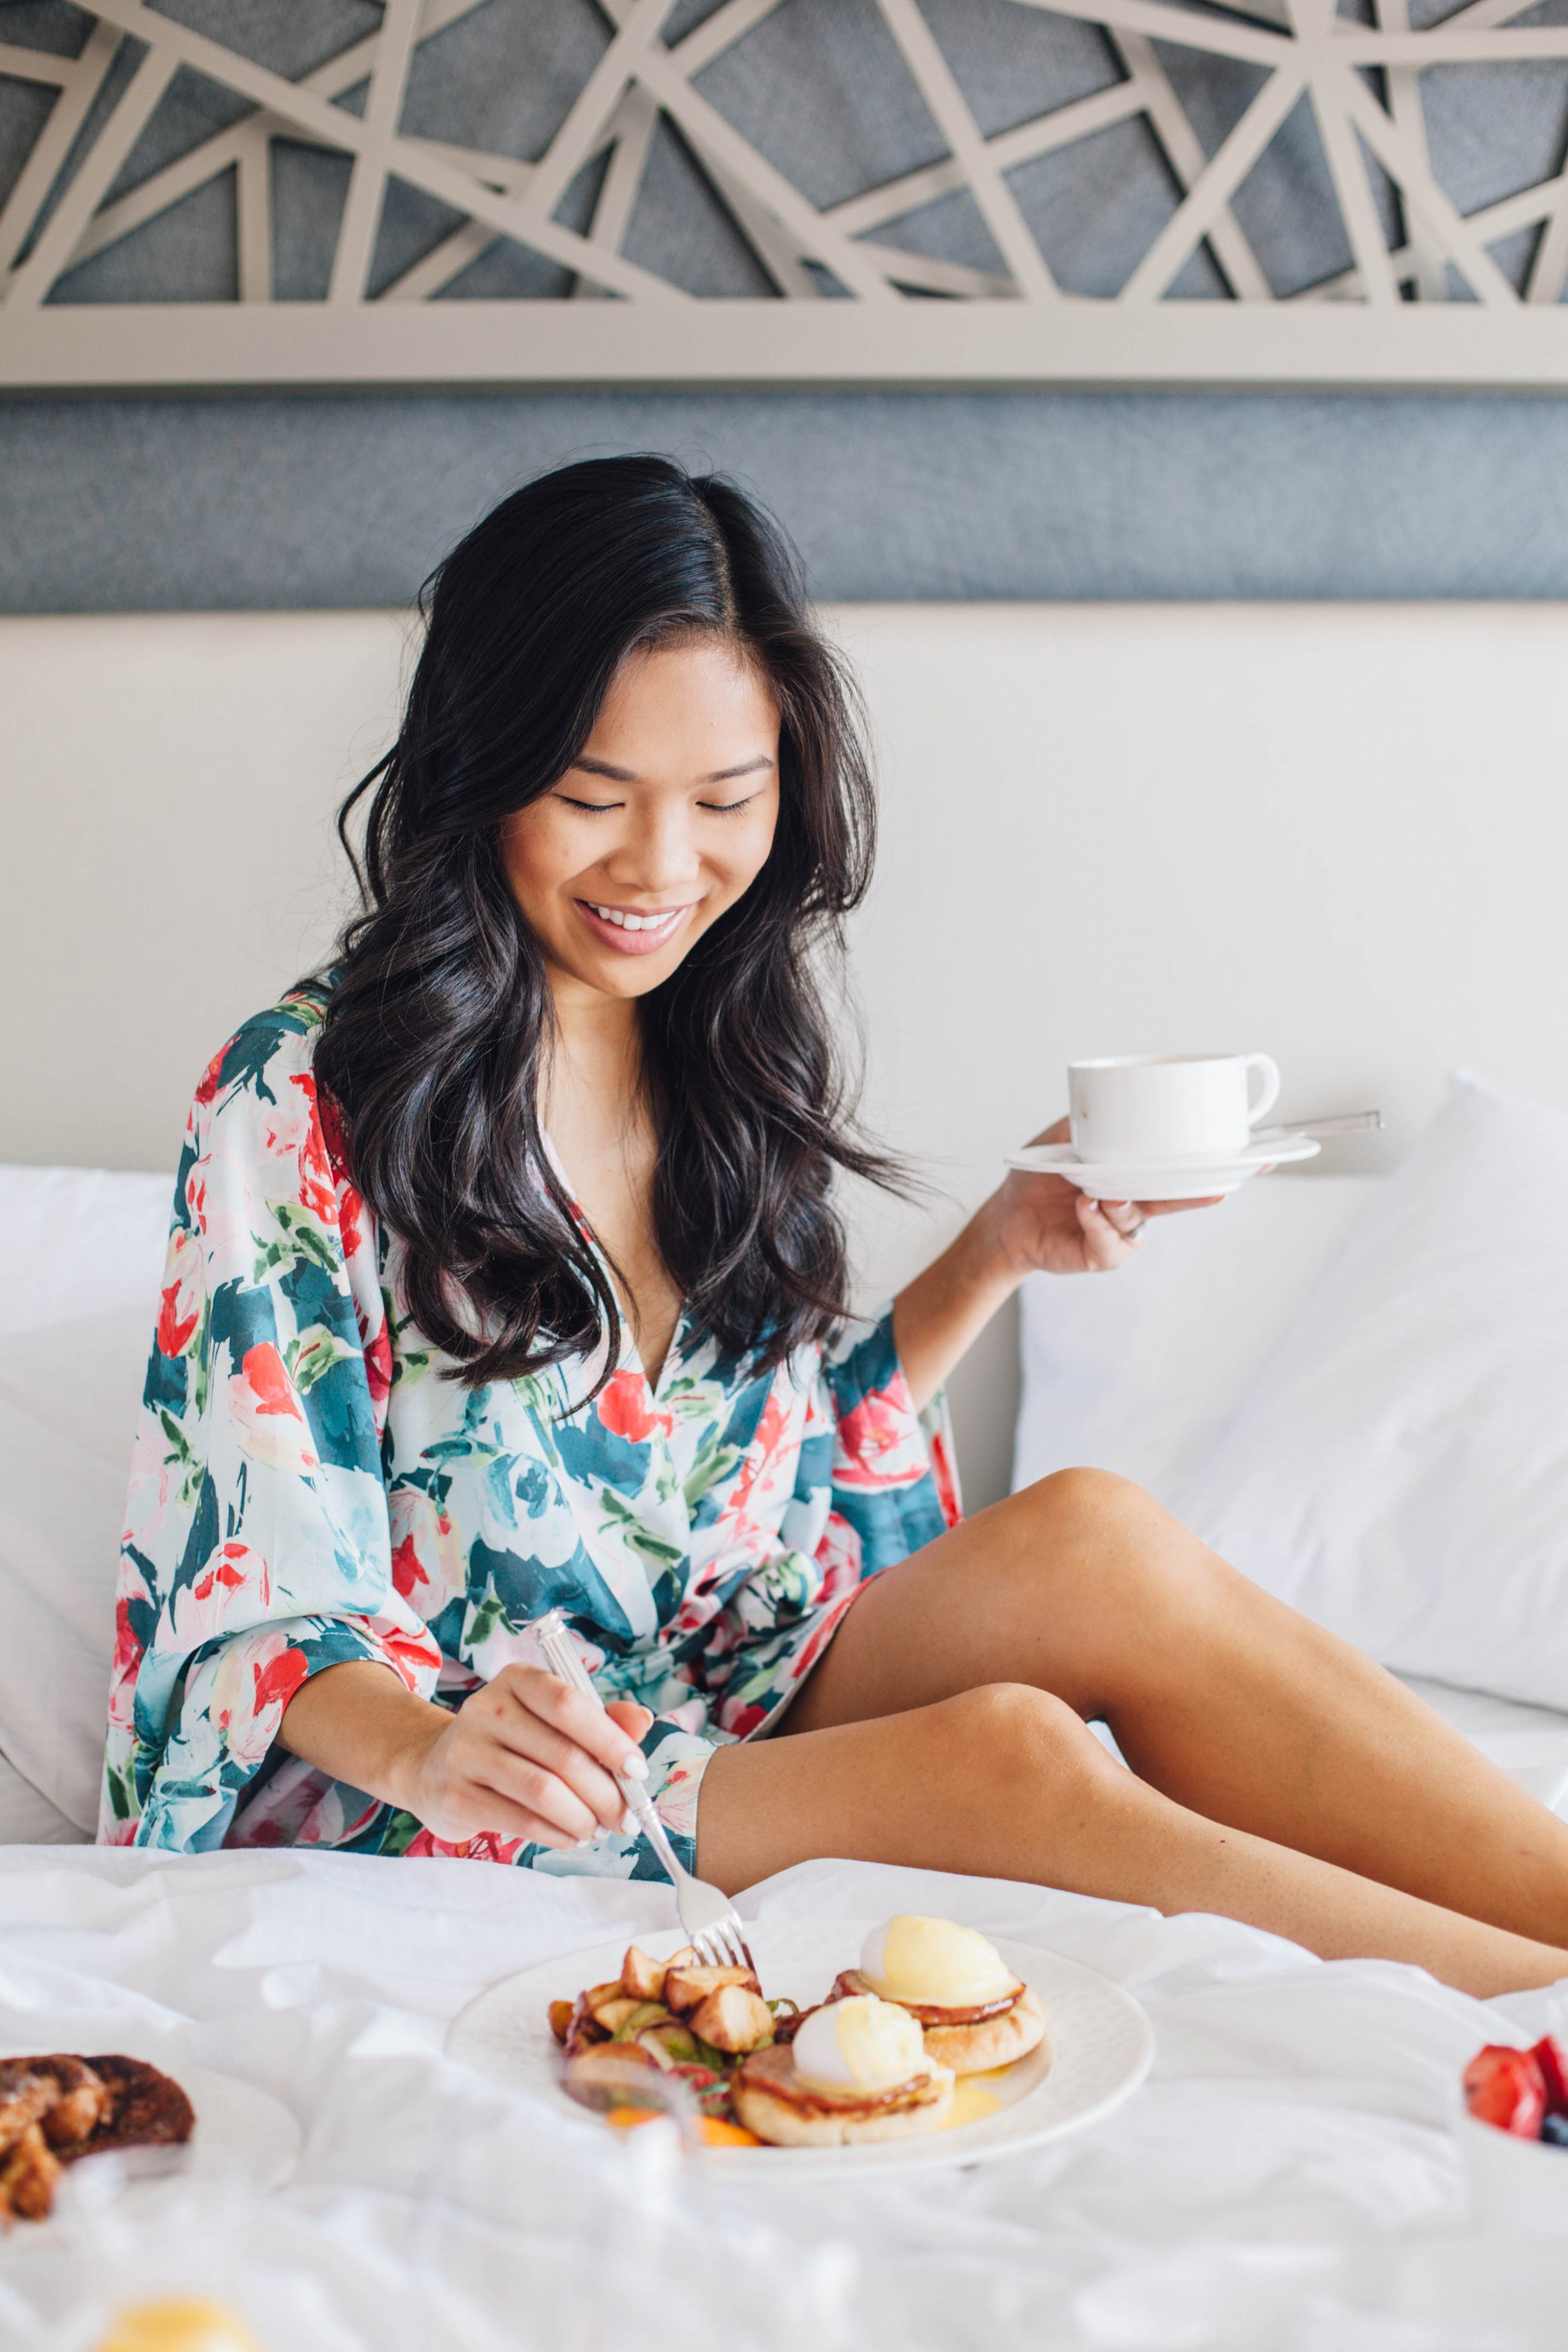 COLOR & CHIC | A staycation at Hilton Norfolk The Main - breakfast in bed wearing a plum pretty sugar robe